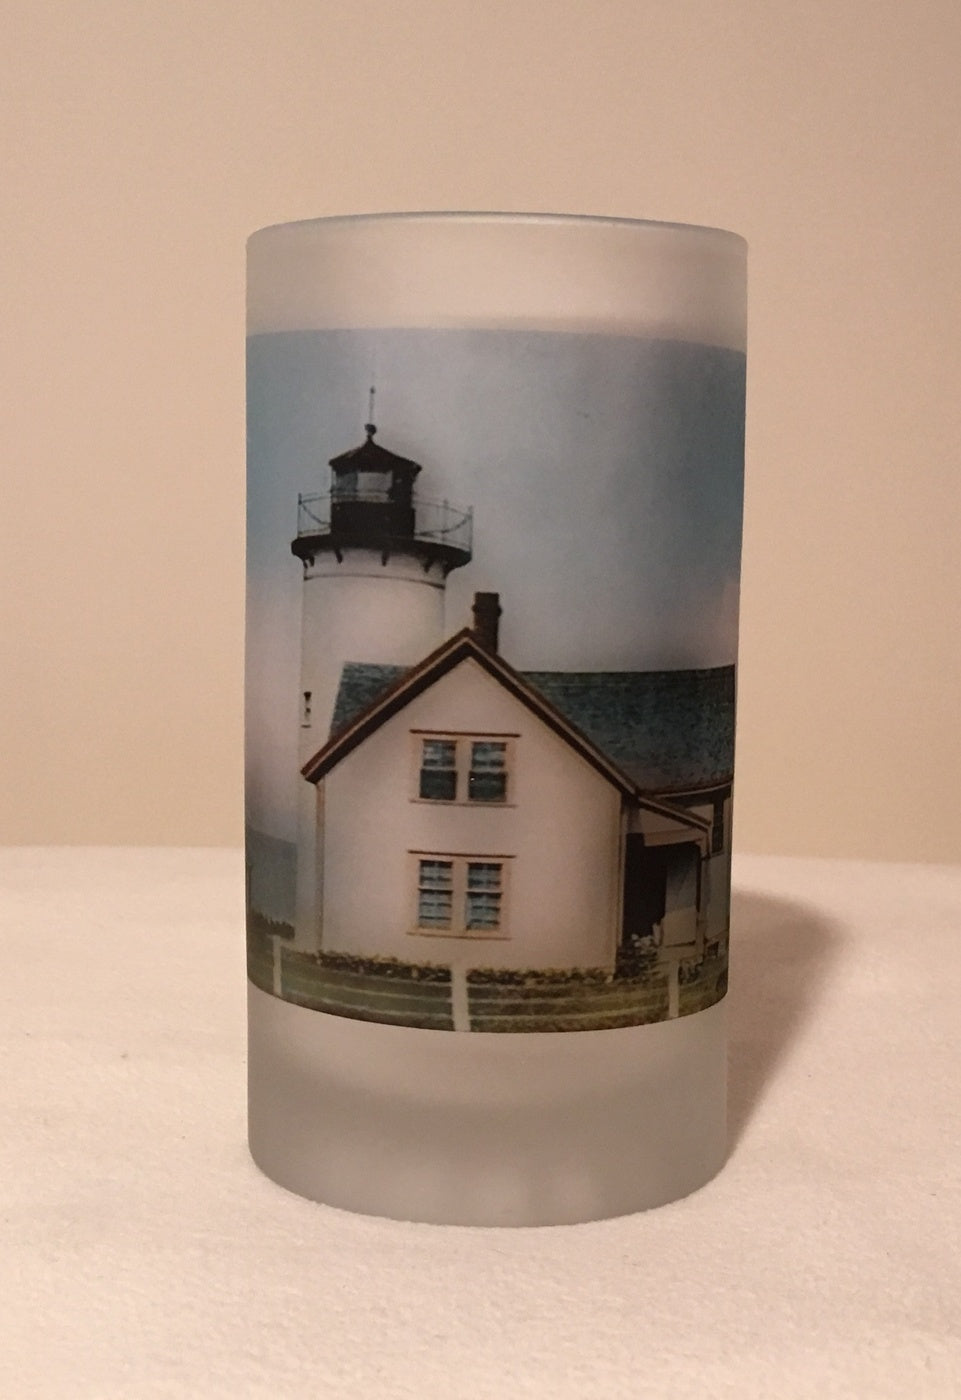 Colorful Frosted Glass Mug Set Of 4 Martha's Vineyard Lighthouses - That Fabled Shore Home Decor